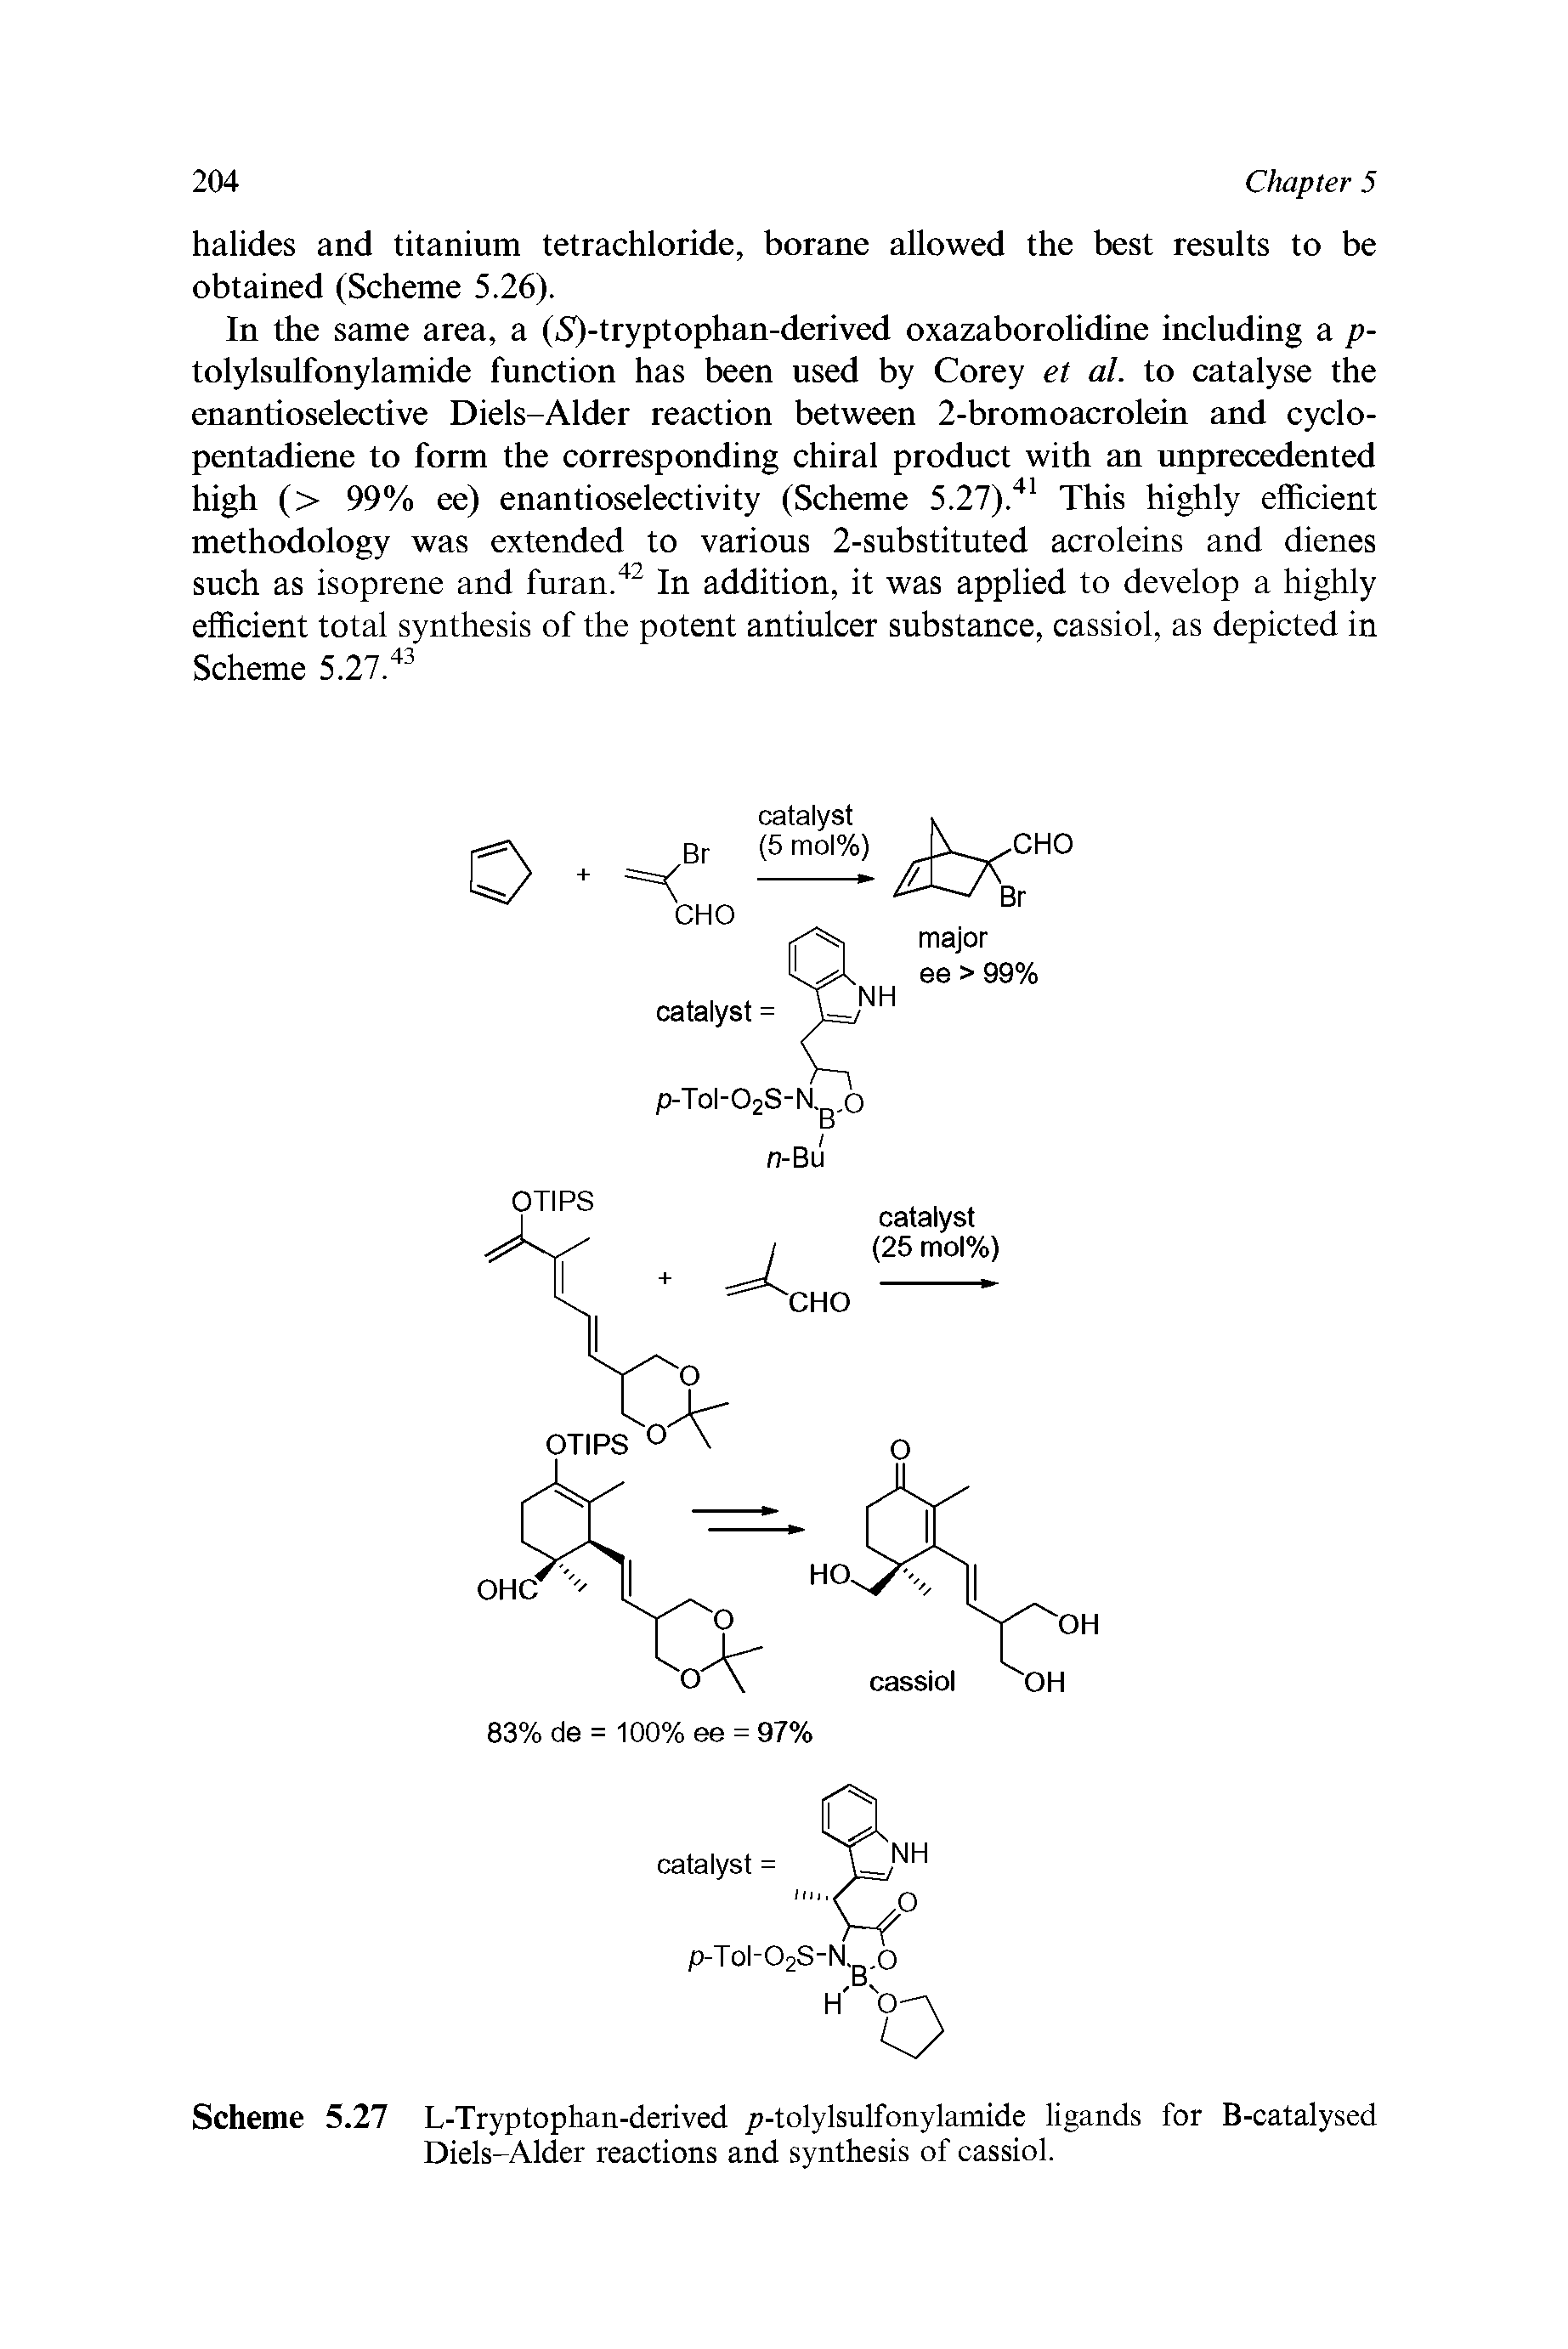 Scheme 5.27 L-Tryptophan-derived i-tolylsulfonylamide ligands for B-catalysed Diels-Alder reactions and synthesis of cassiol.